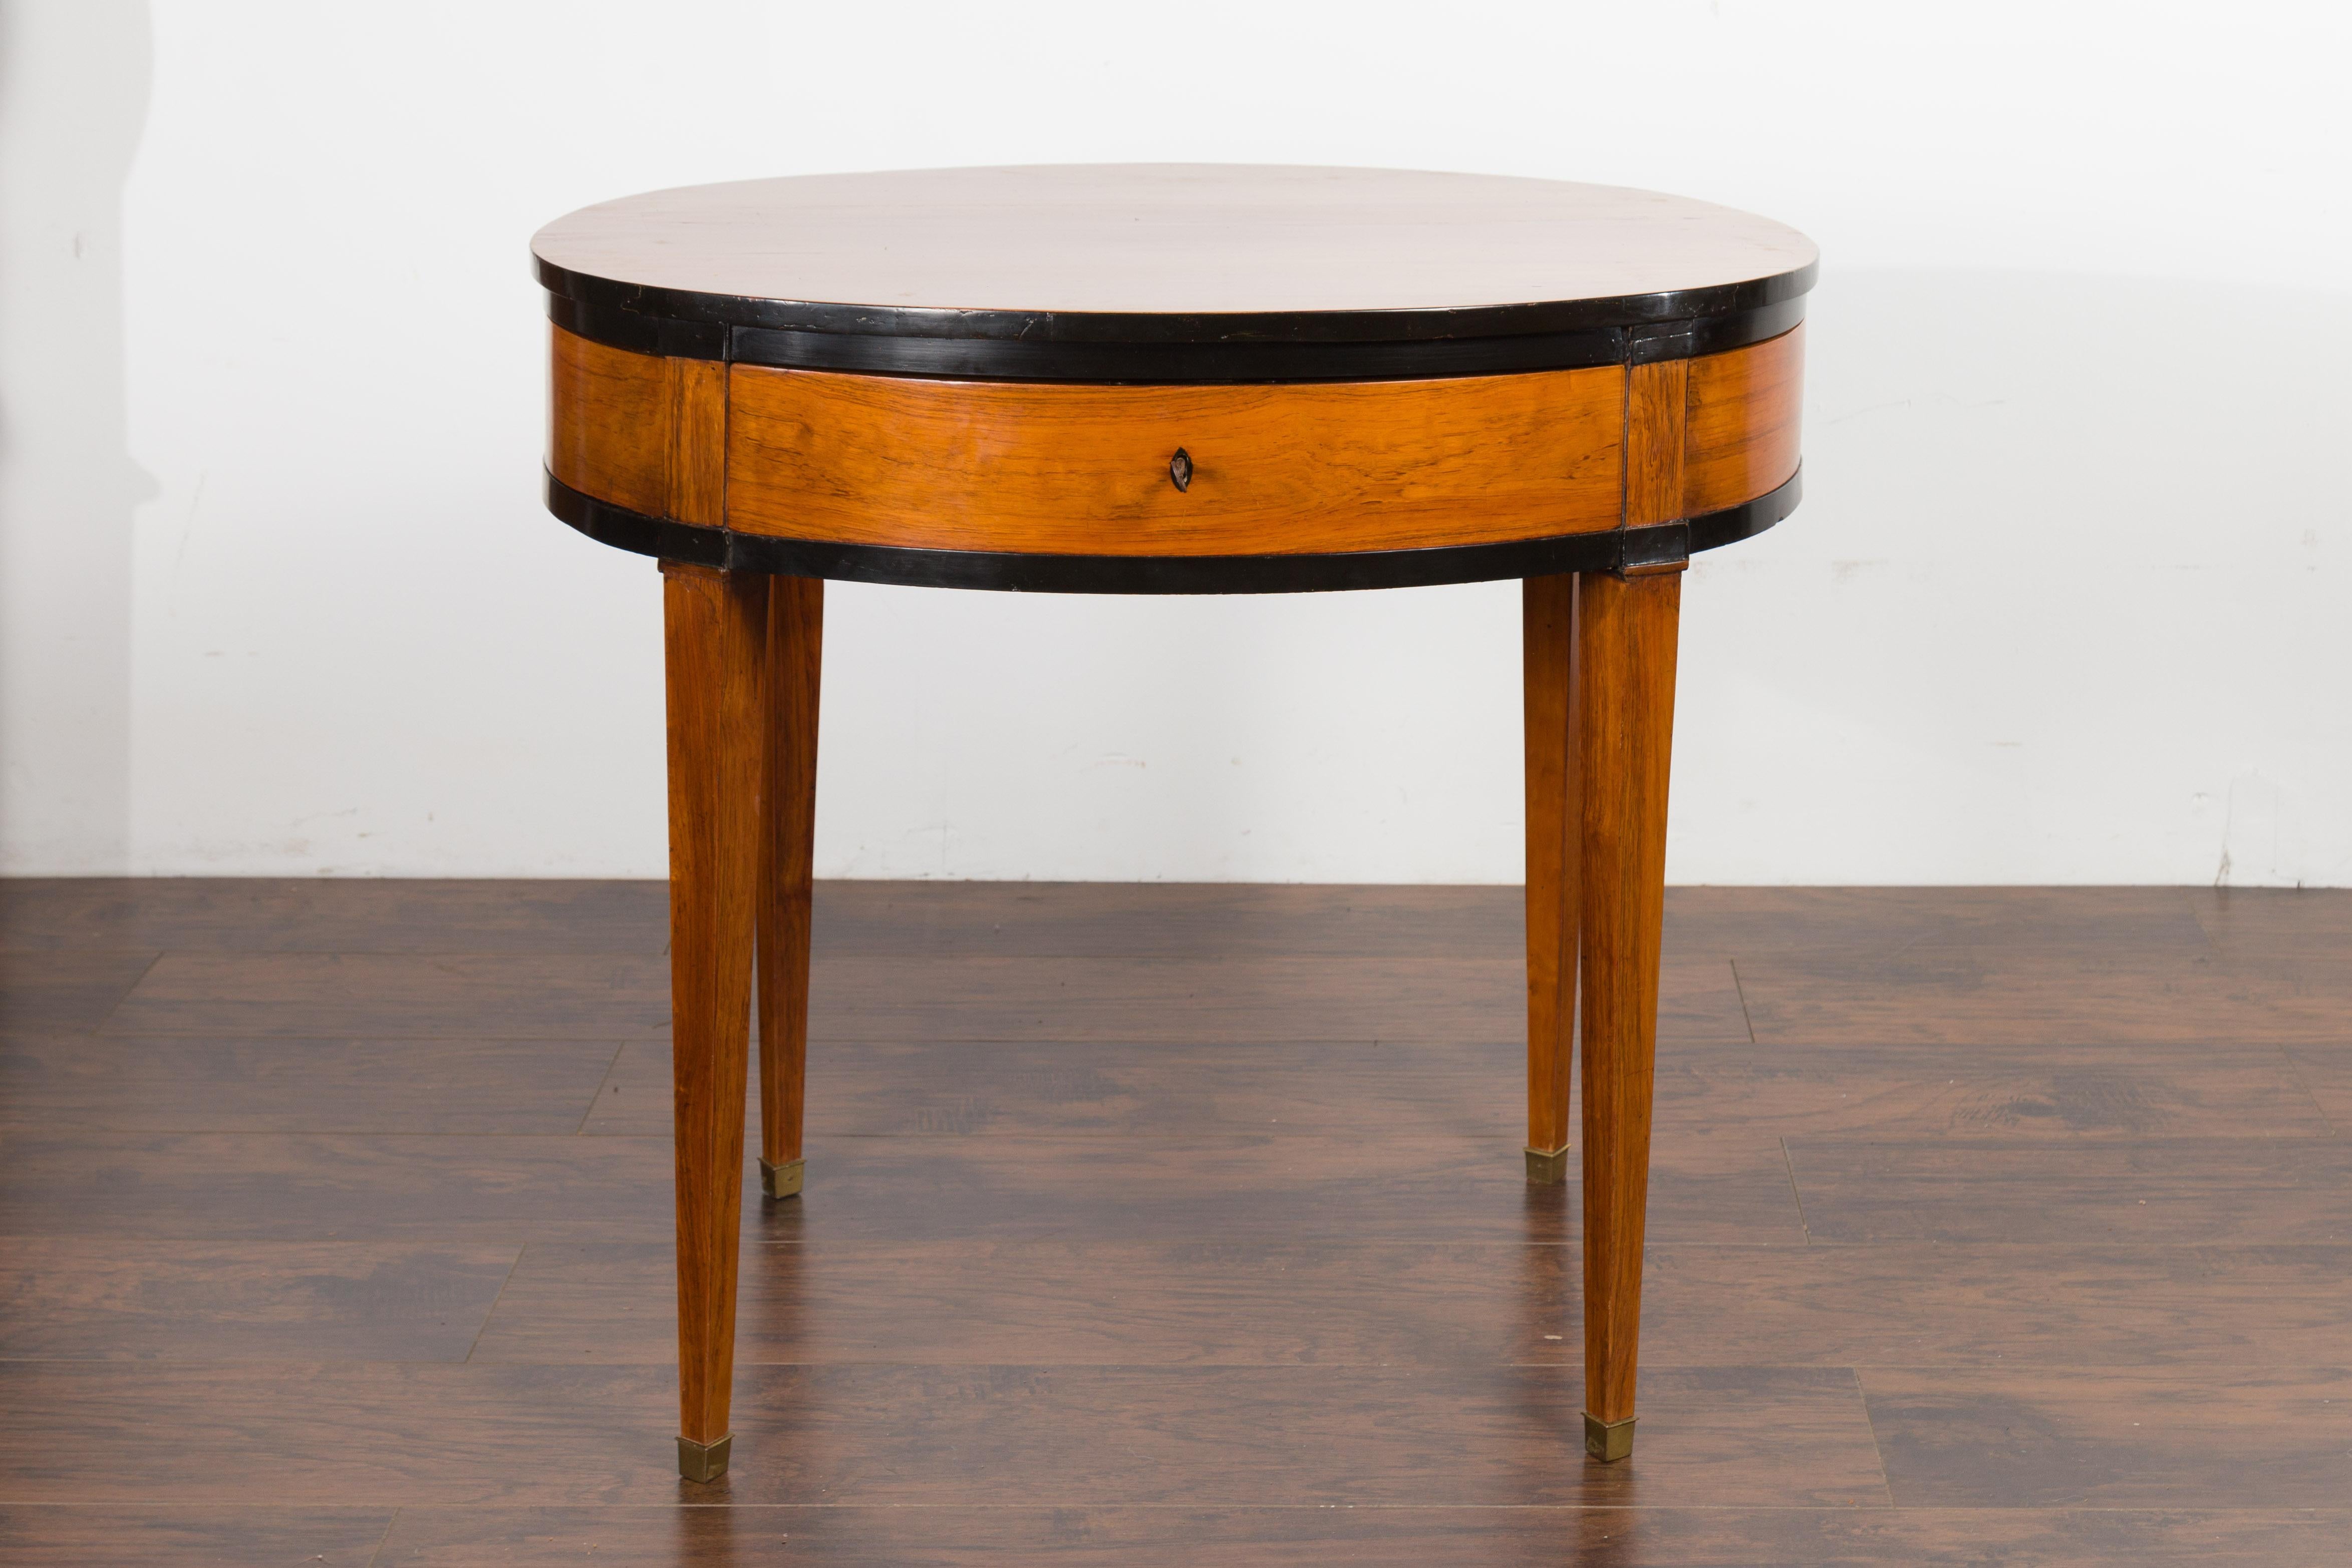 Austrian 1840s Biedermeier Oval Top Table with Drawer and Ebonized Accents 1